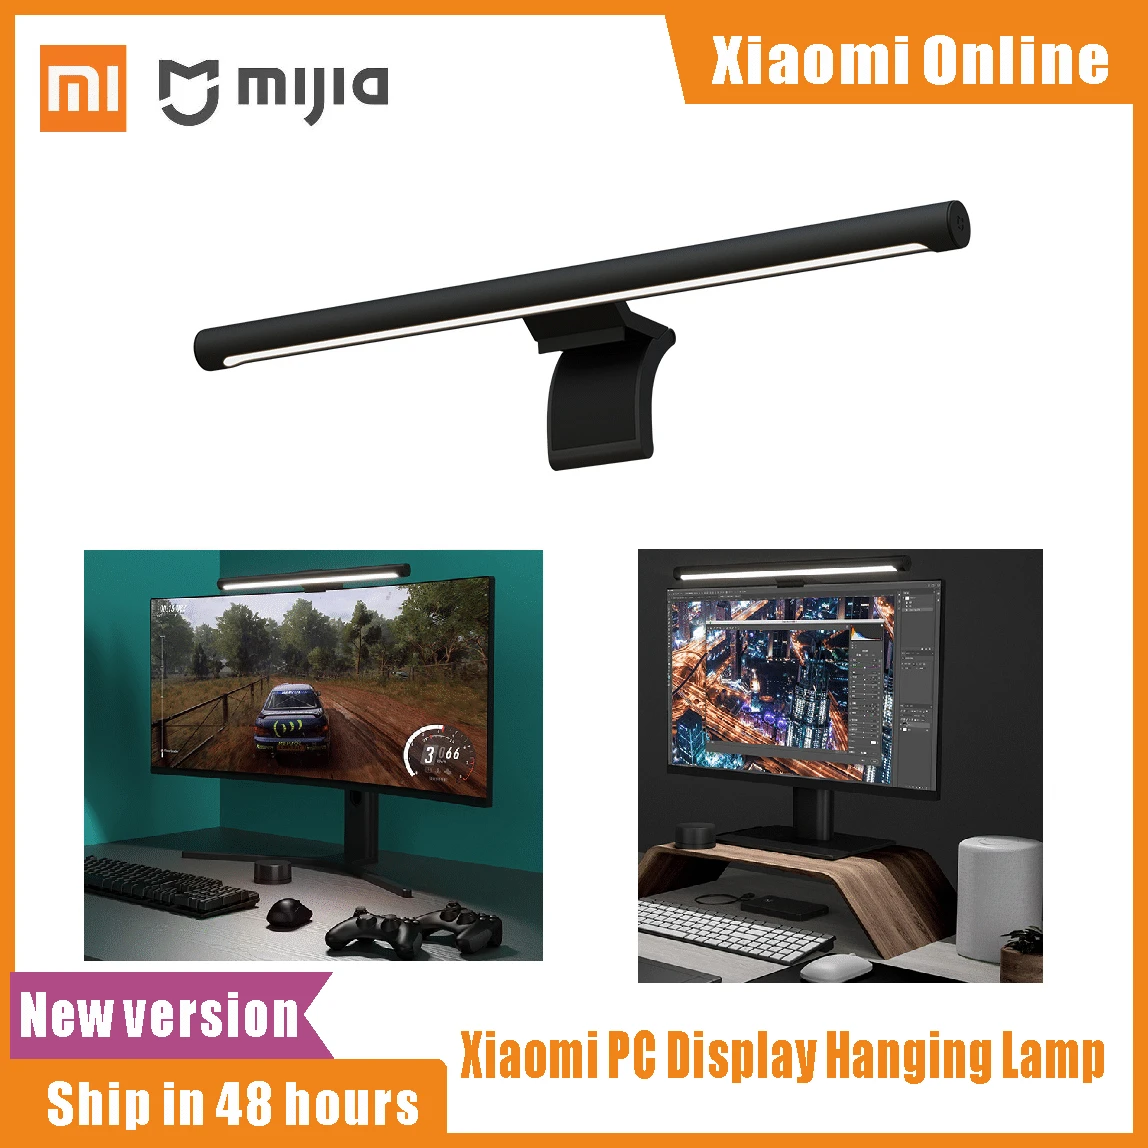 Xiaomi Mijia Lite Desk Lamp Foldable Student Eyes Protection USB Type-C for Computer PC Monitor Screen bar Hanging Light LED